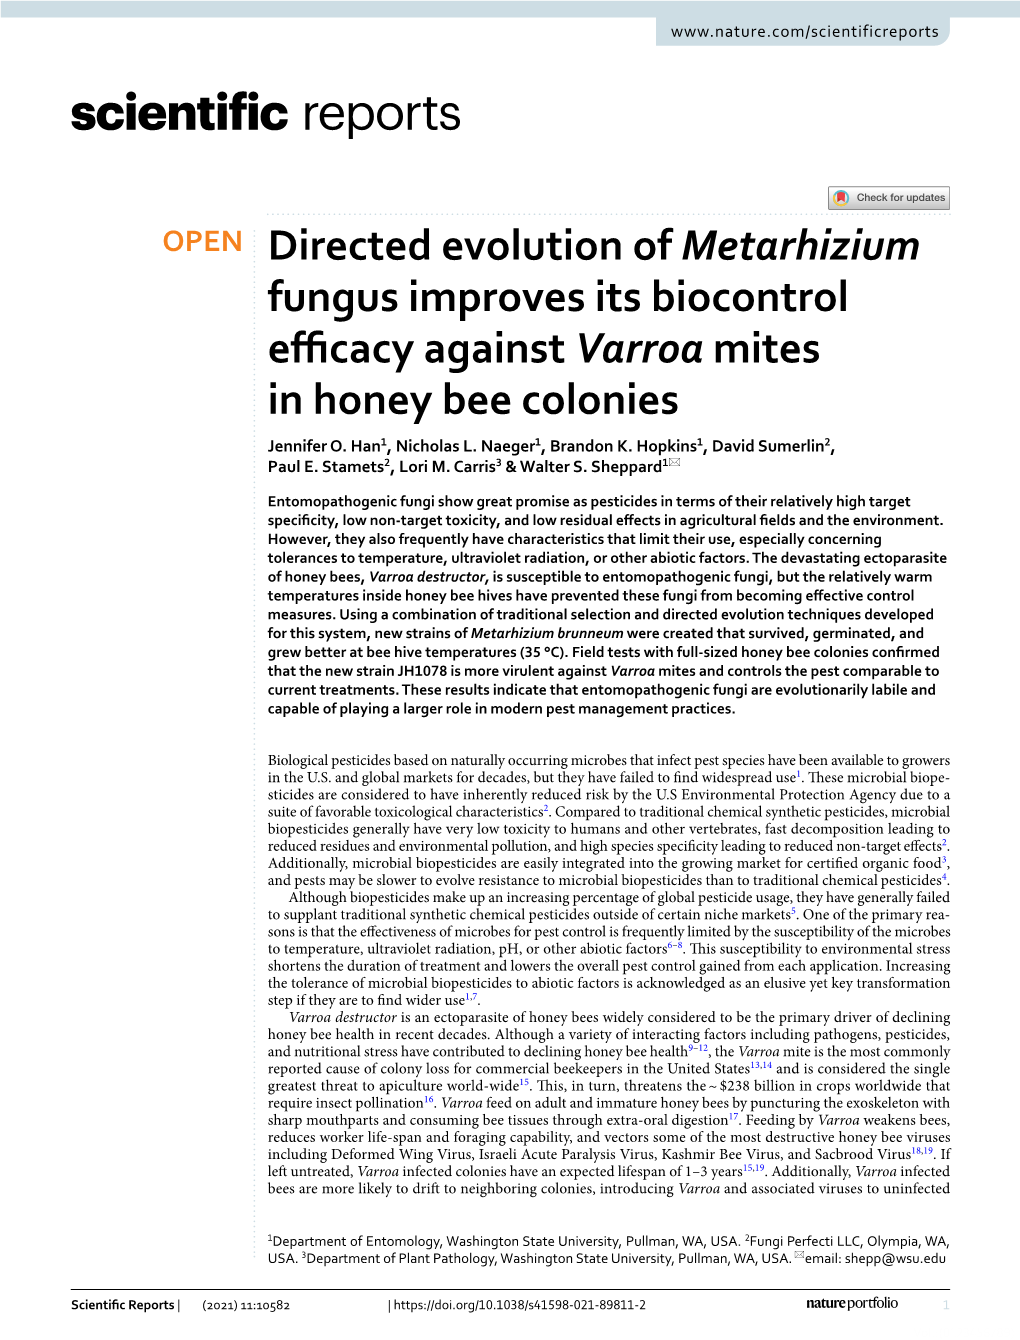 Directed Evolution of Metarhizium Fungus Improves Its Biocontrol Efcacy Against Varroa Mites in Honey Bee Colonies Jennifer O